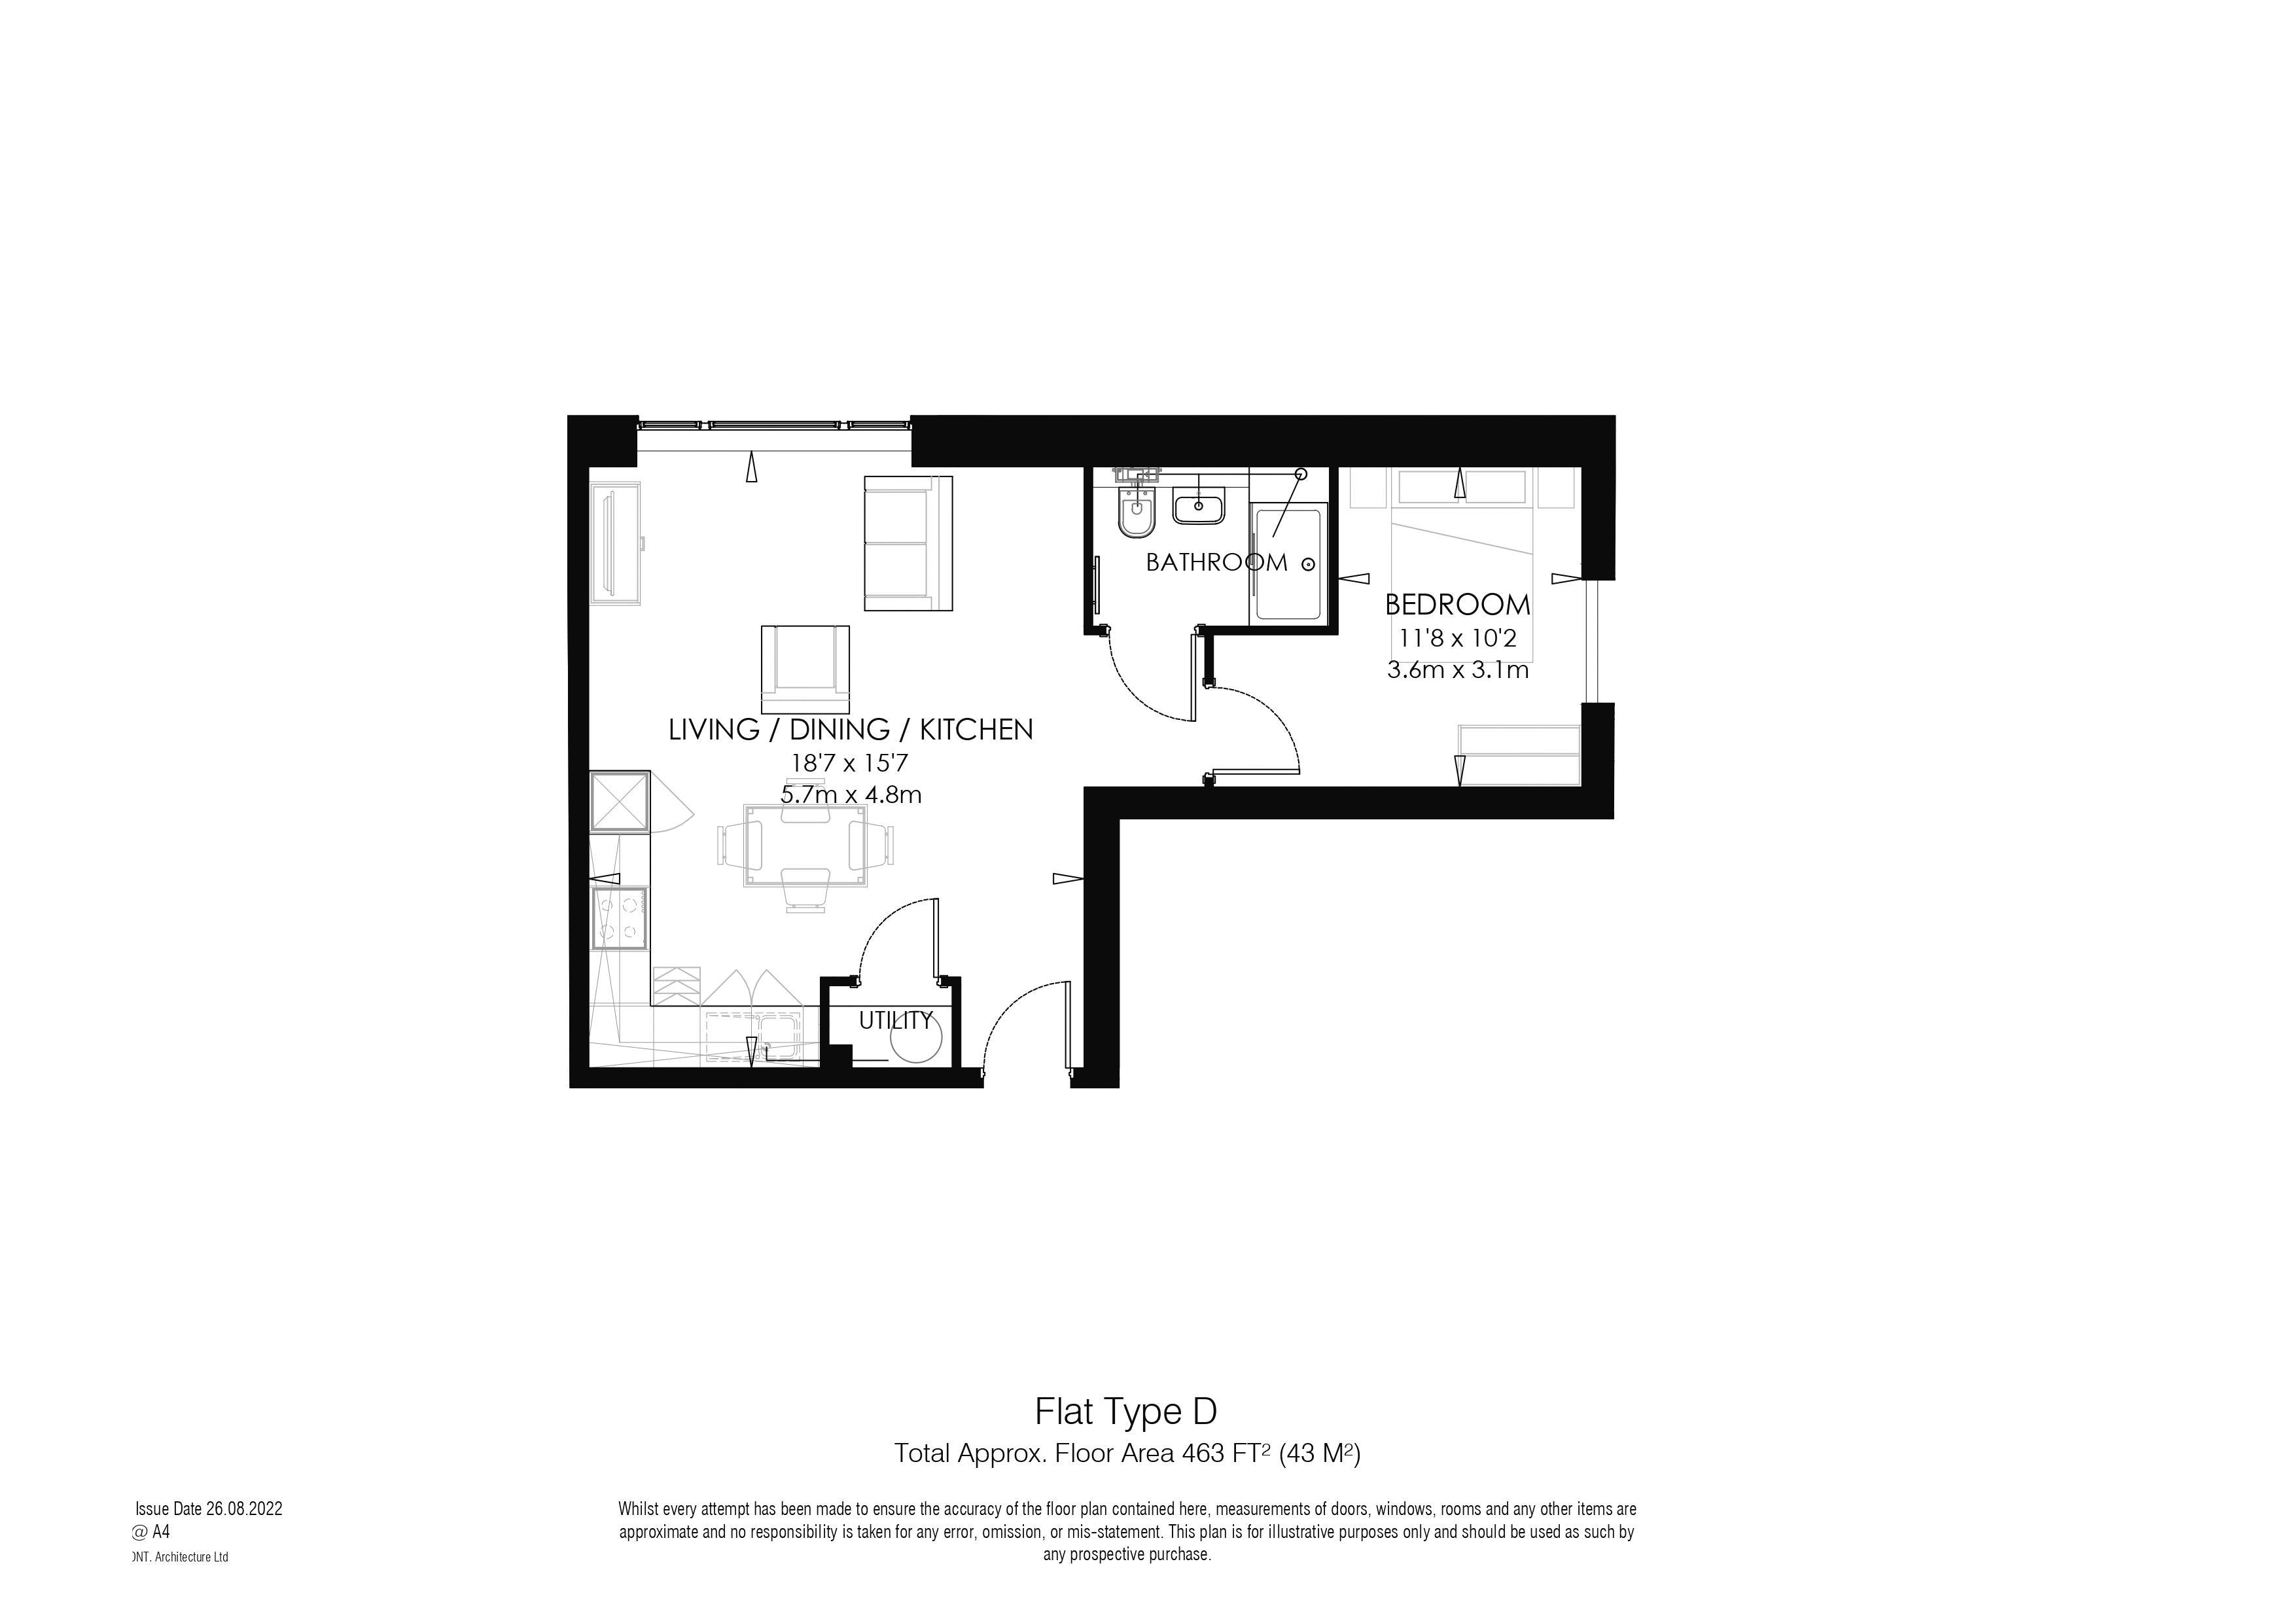 1 bed to rent in Chatham Maritime, Chatham - Property Floorplan